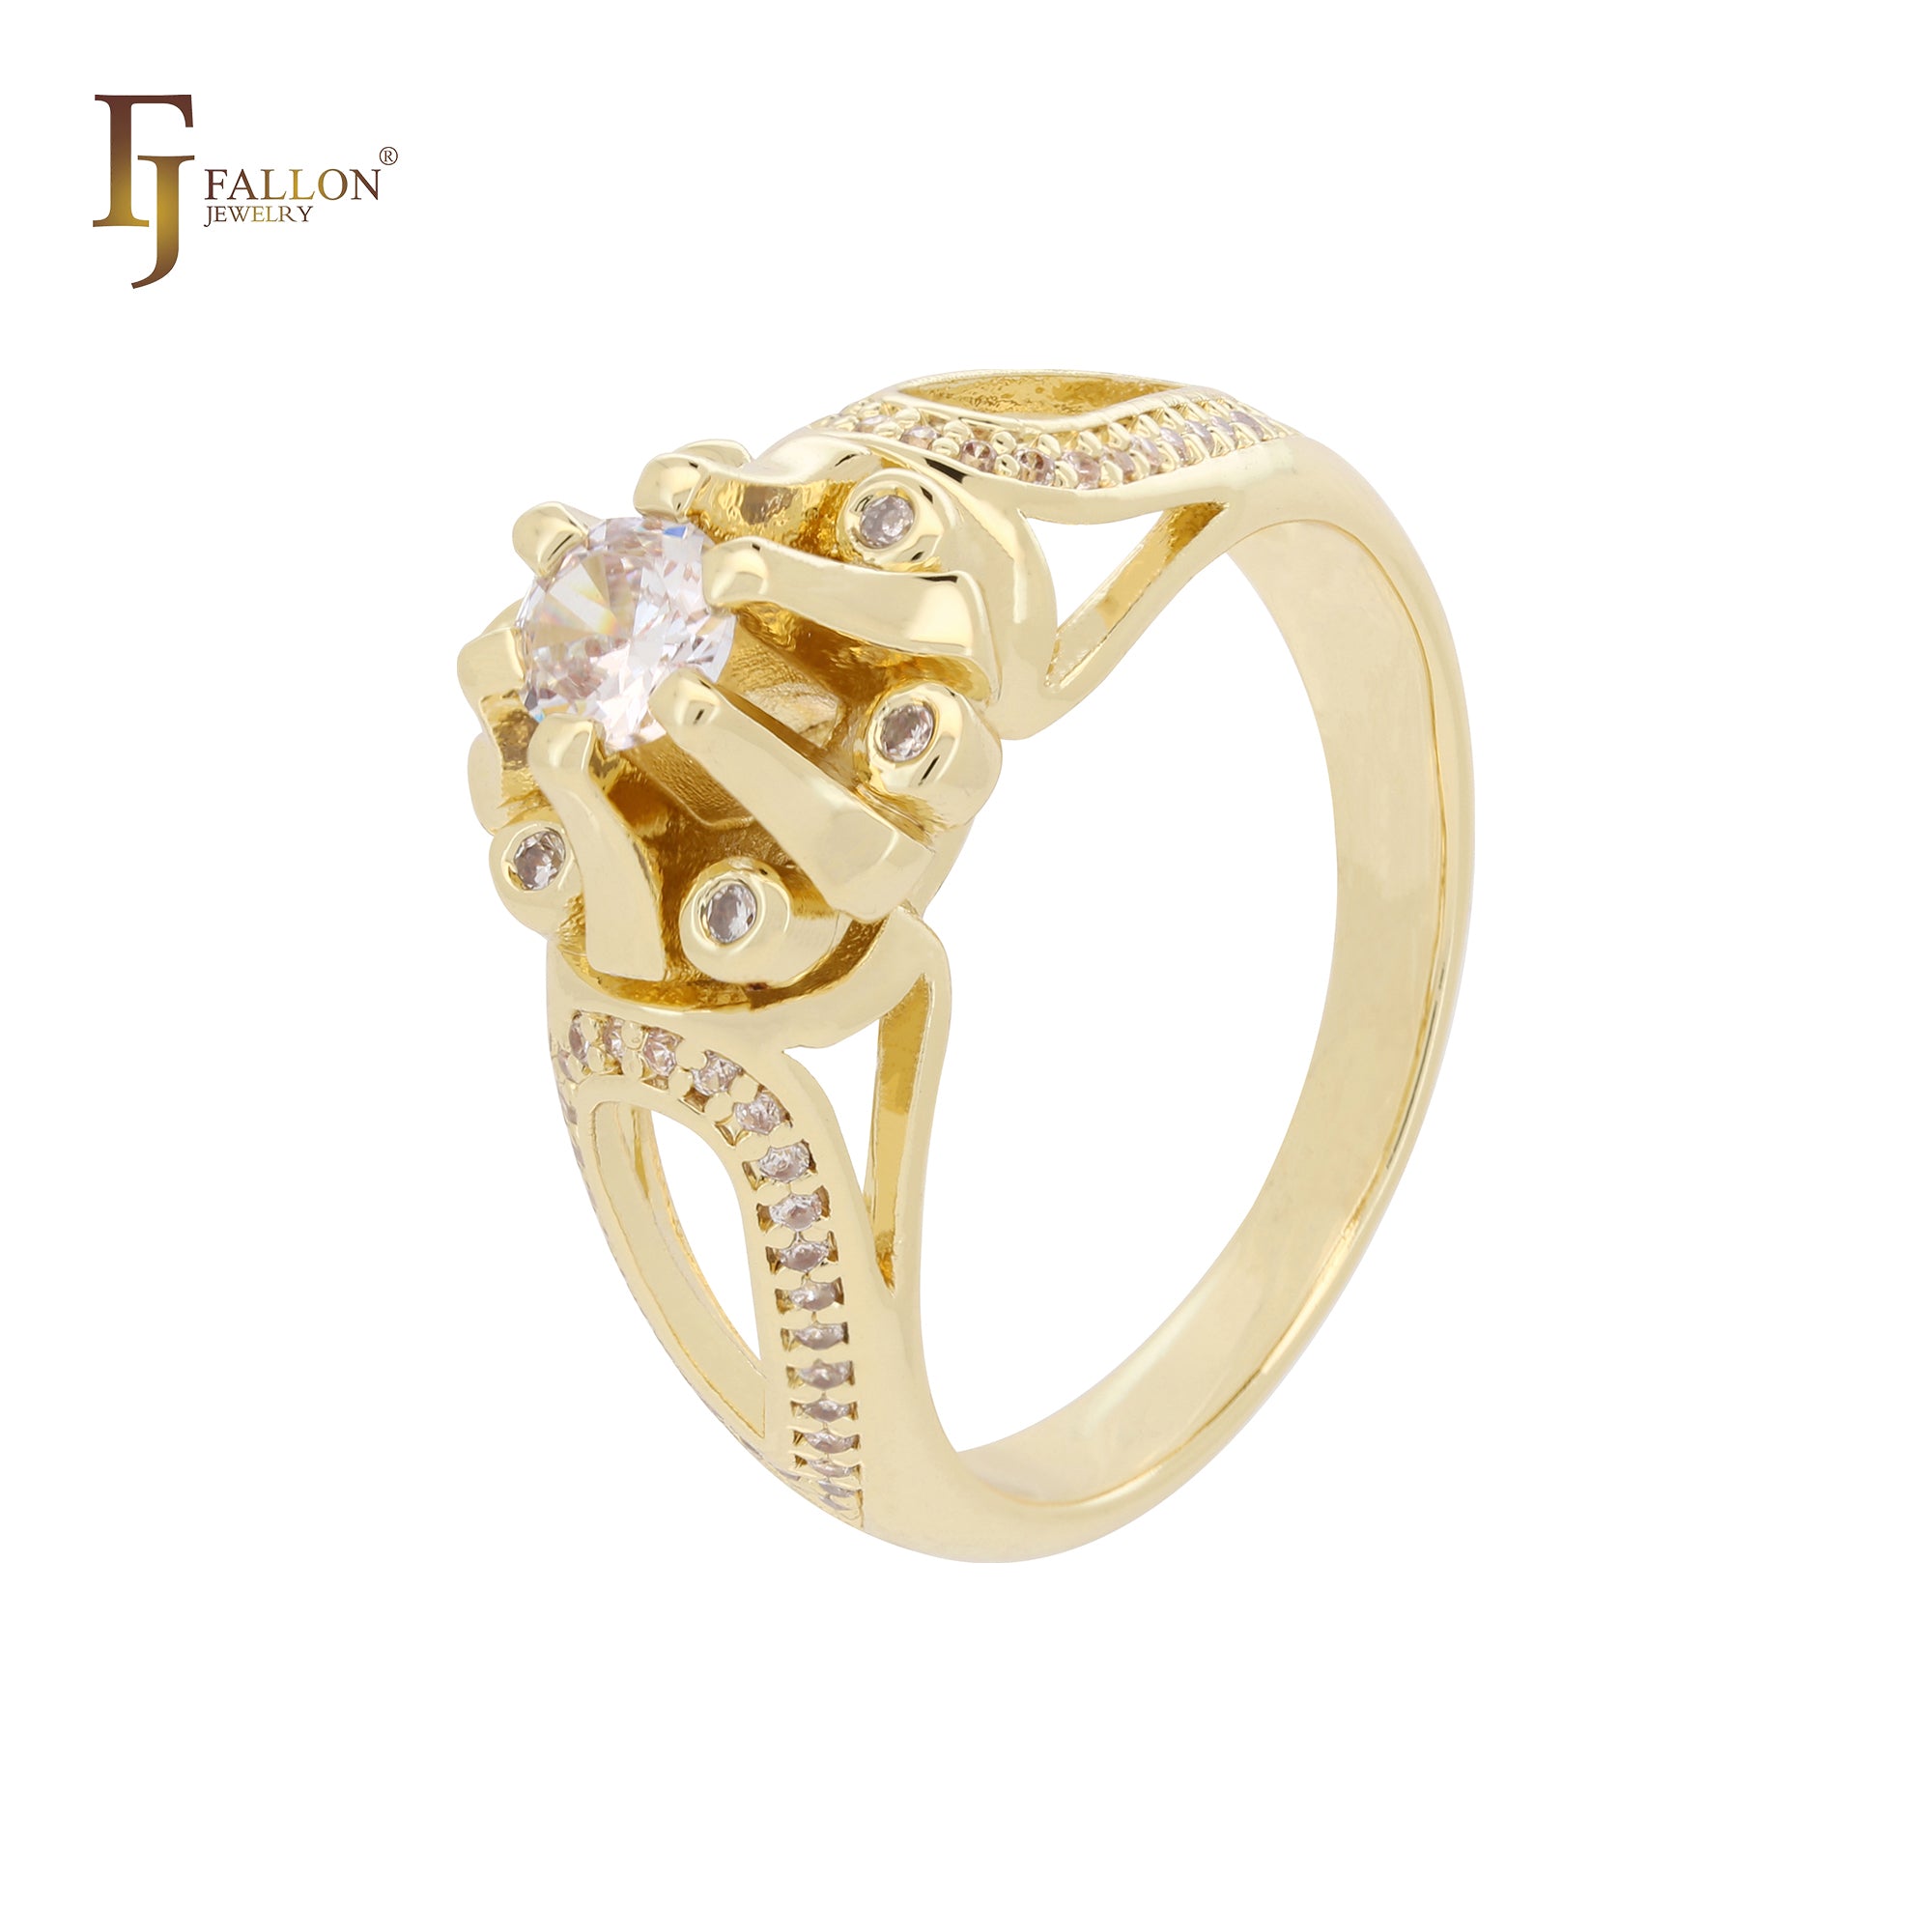 Solitaire clawed white CZ 14K Gold, Rose Gold Fashion Rings